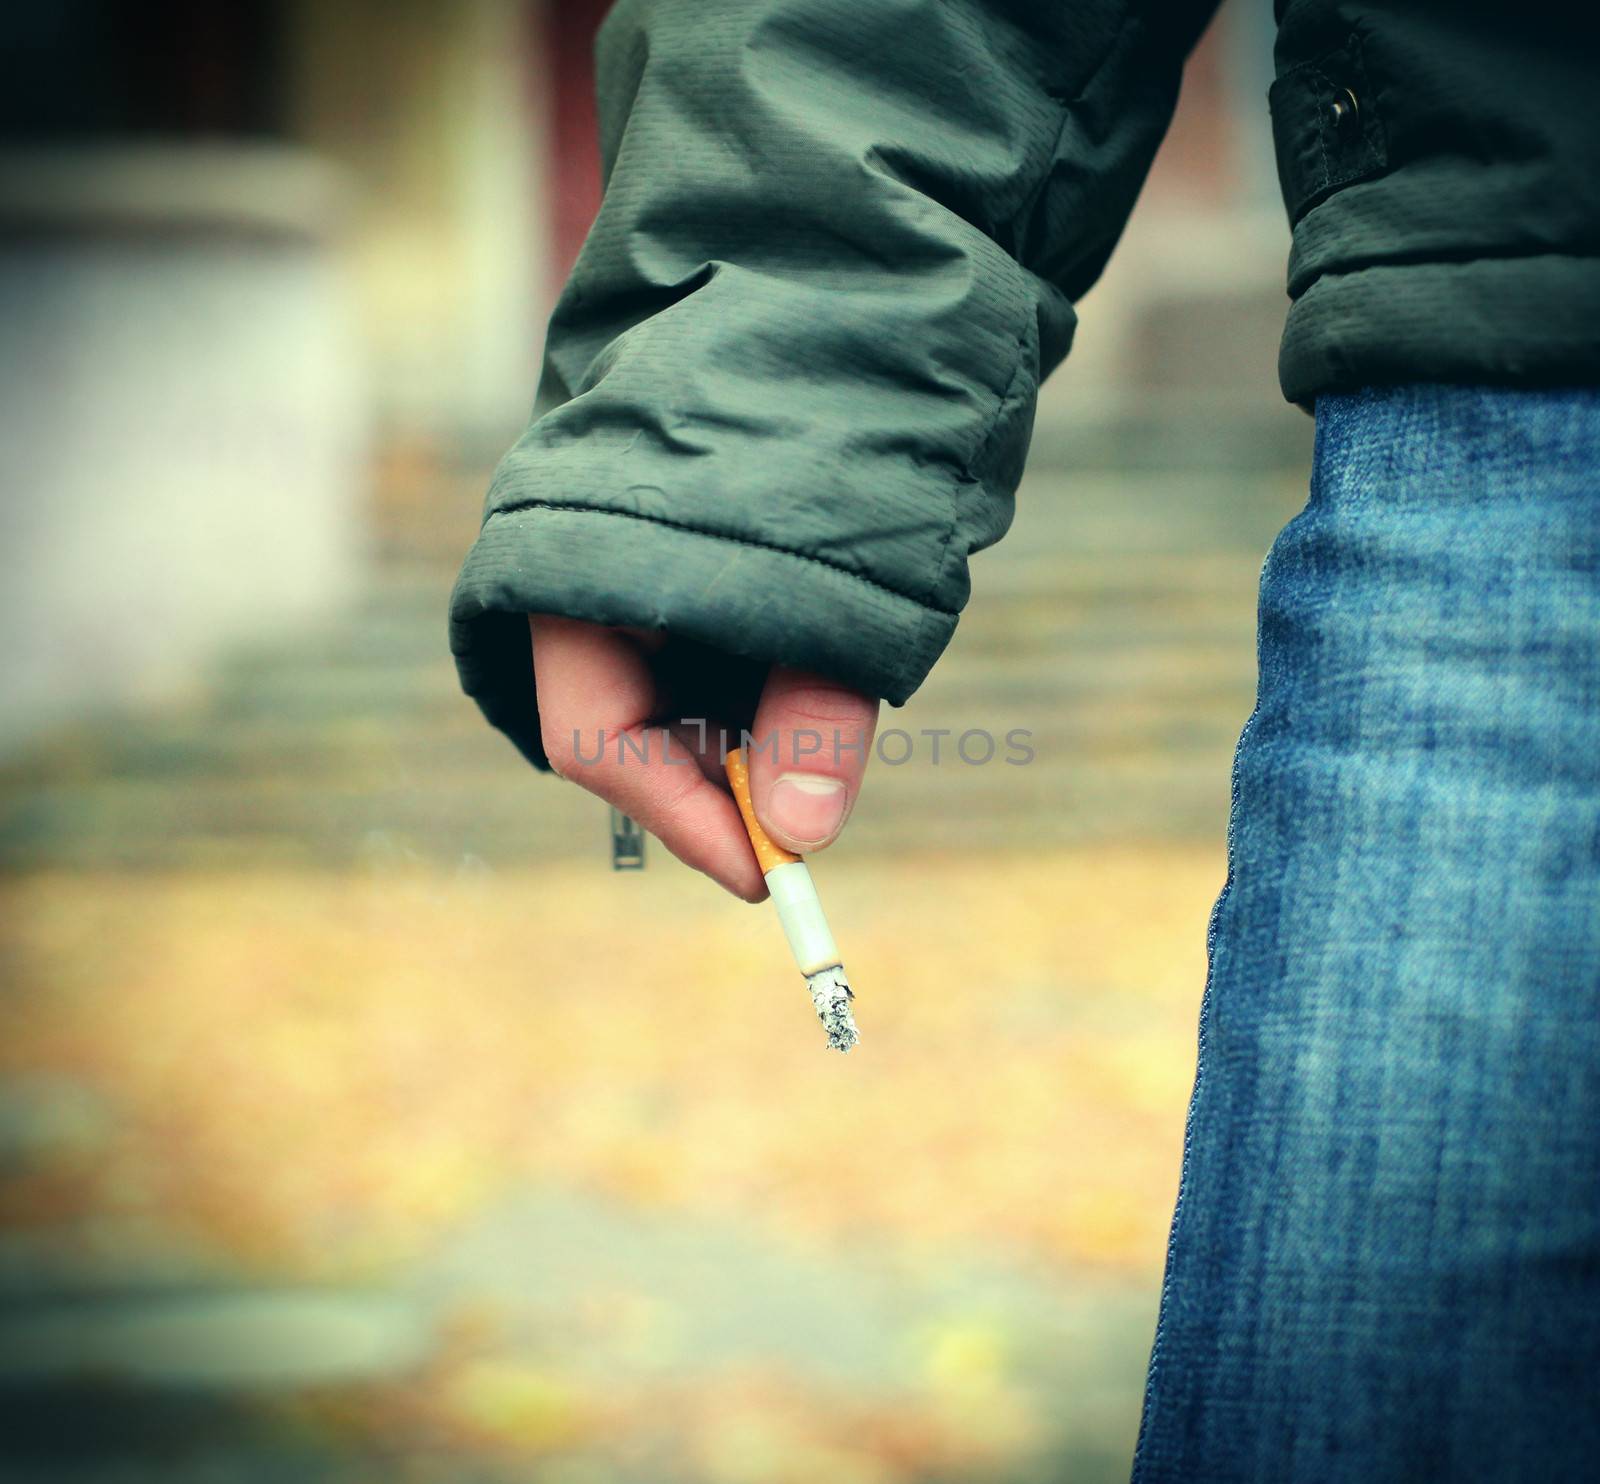 Toned photo of Cigarette in the hand closeup outdoor